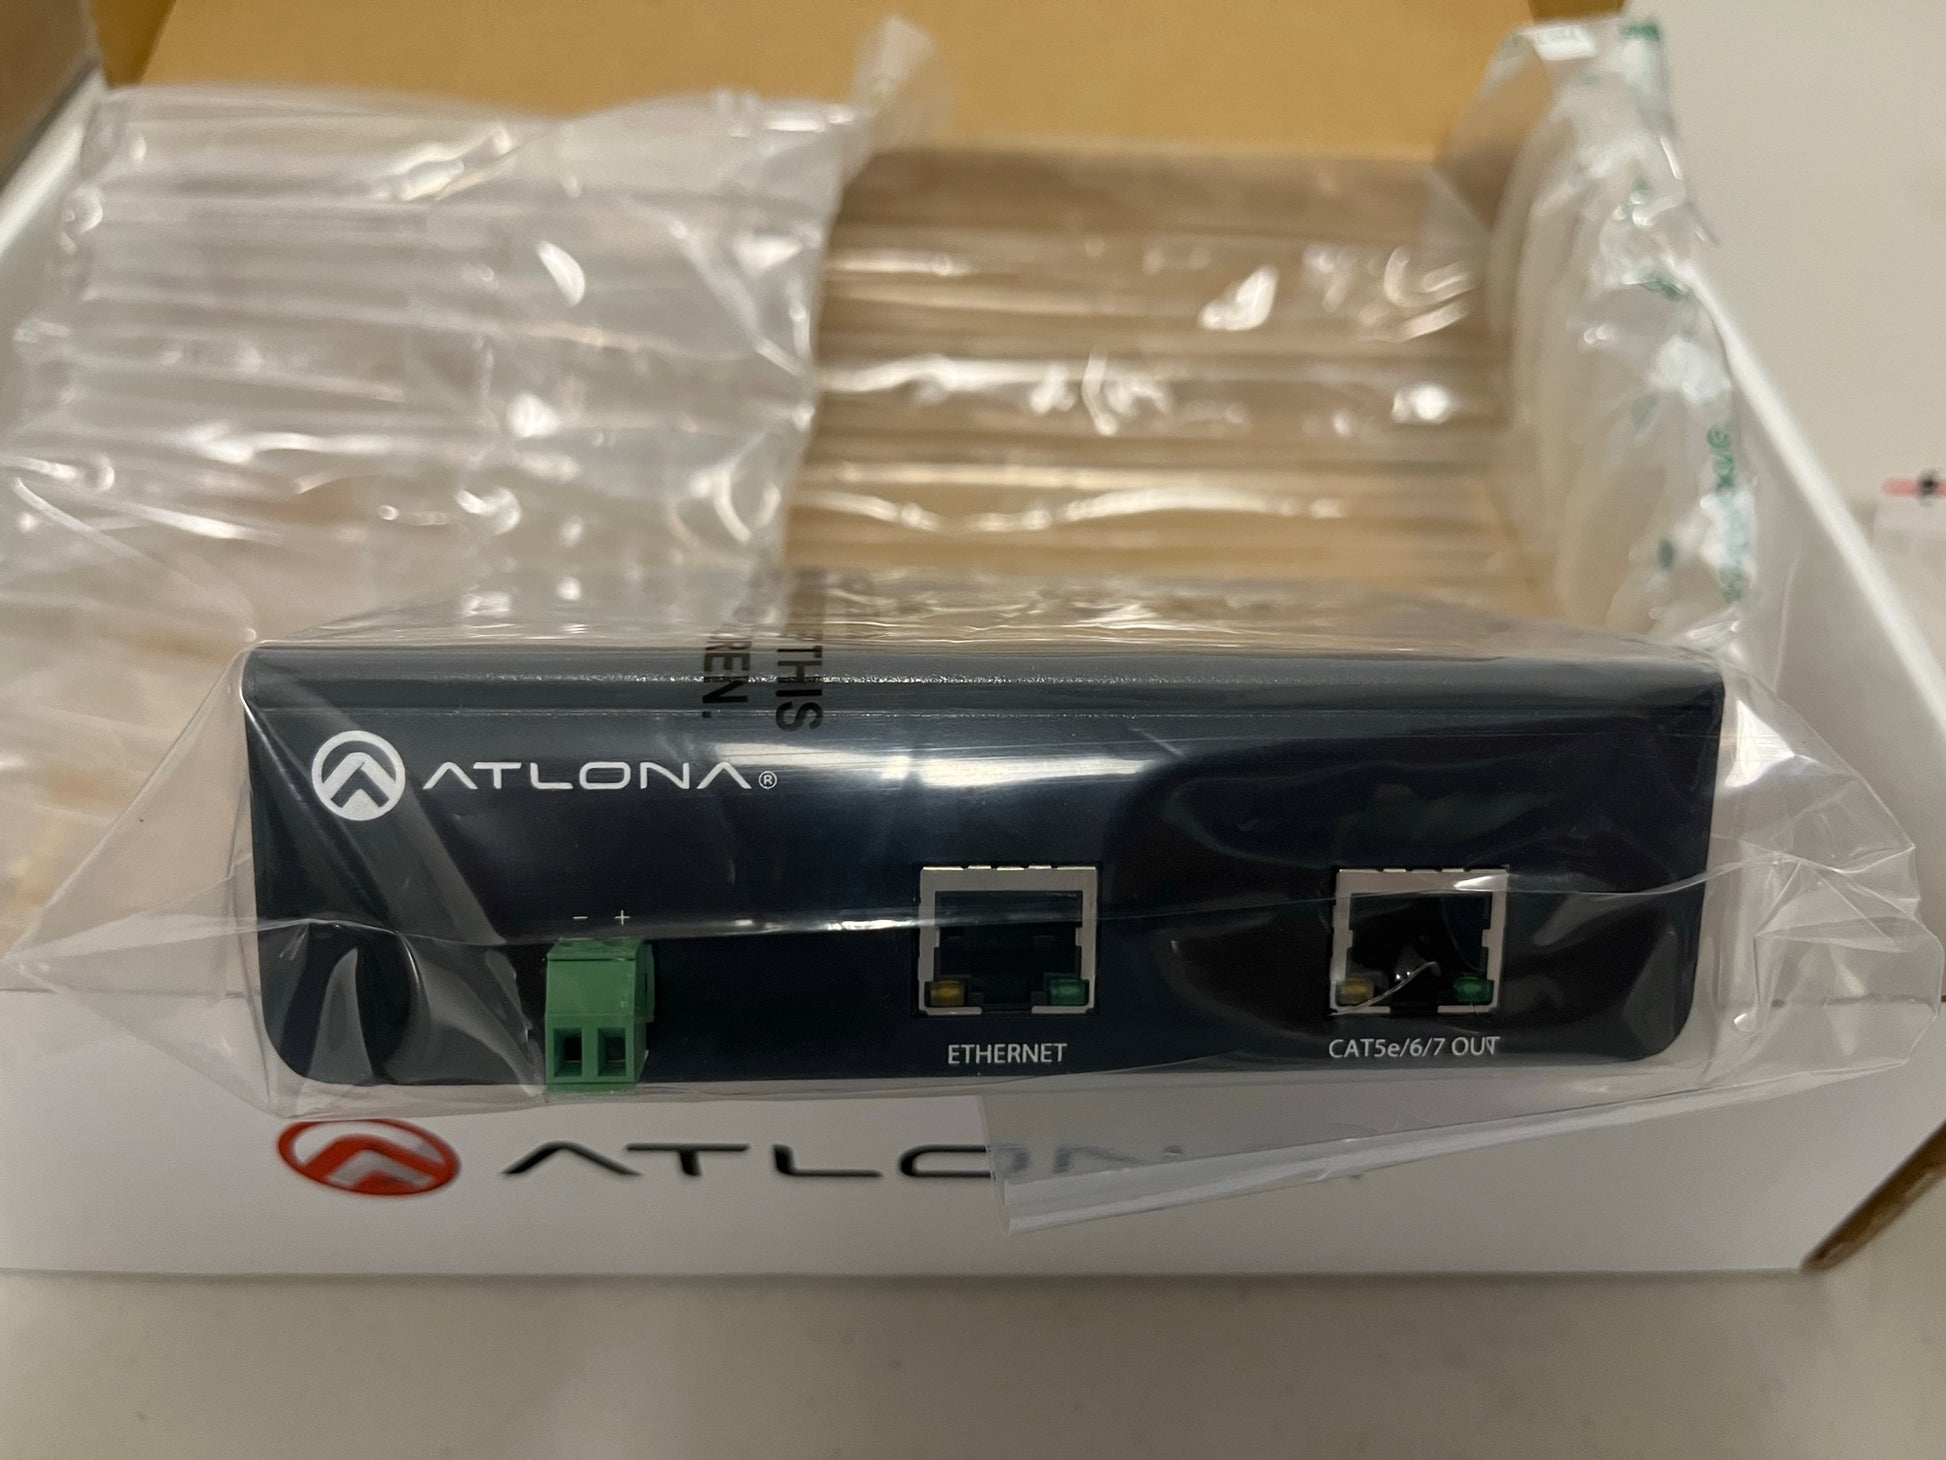 New Atlona AT-DVITX-RSNET, DVI Transmitter for Sale,  We Sell Professional Audio Equipment. Audio Systems, Amplifiers, Consoles, Mixers, Electronics, Entertainment, Sound, Live.